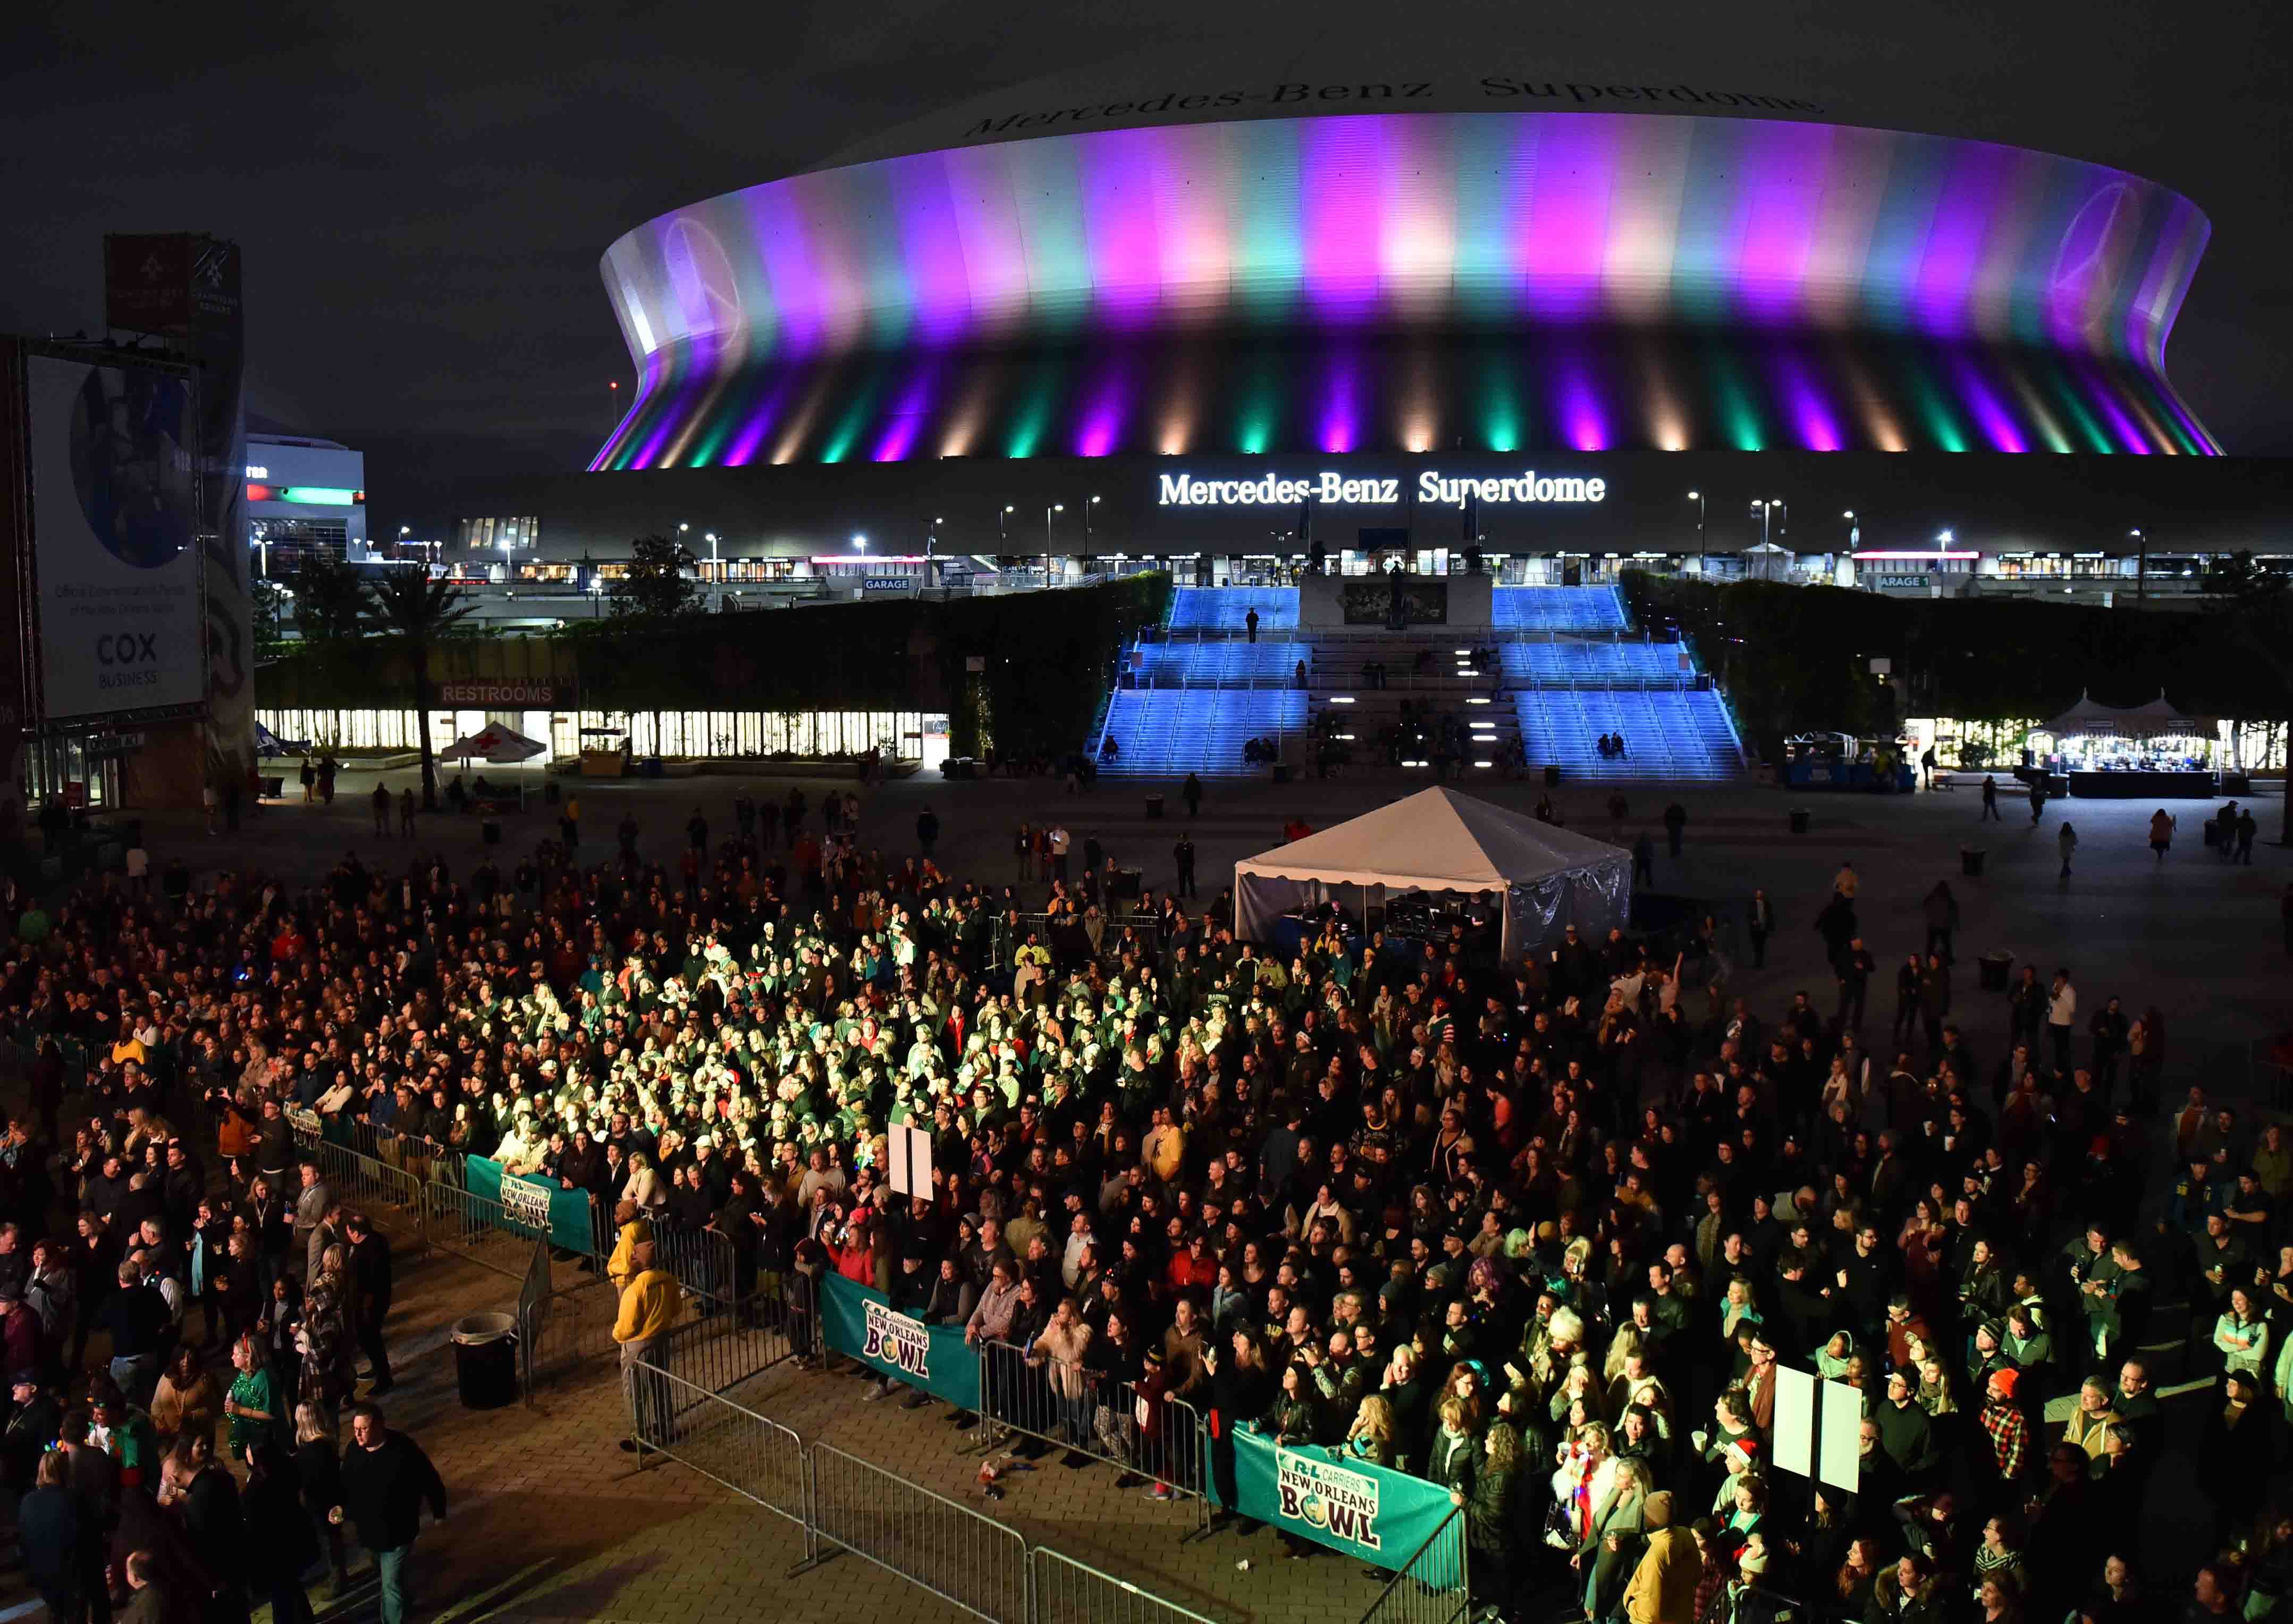 Large Crowd outside the Mercedes-Benz Superdome